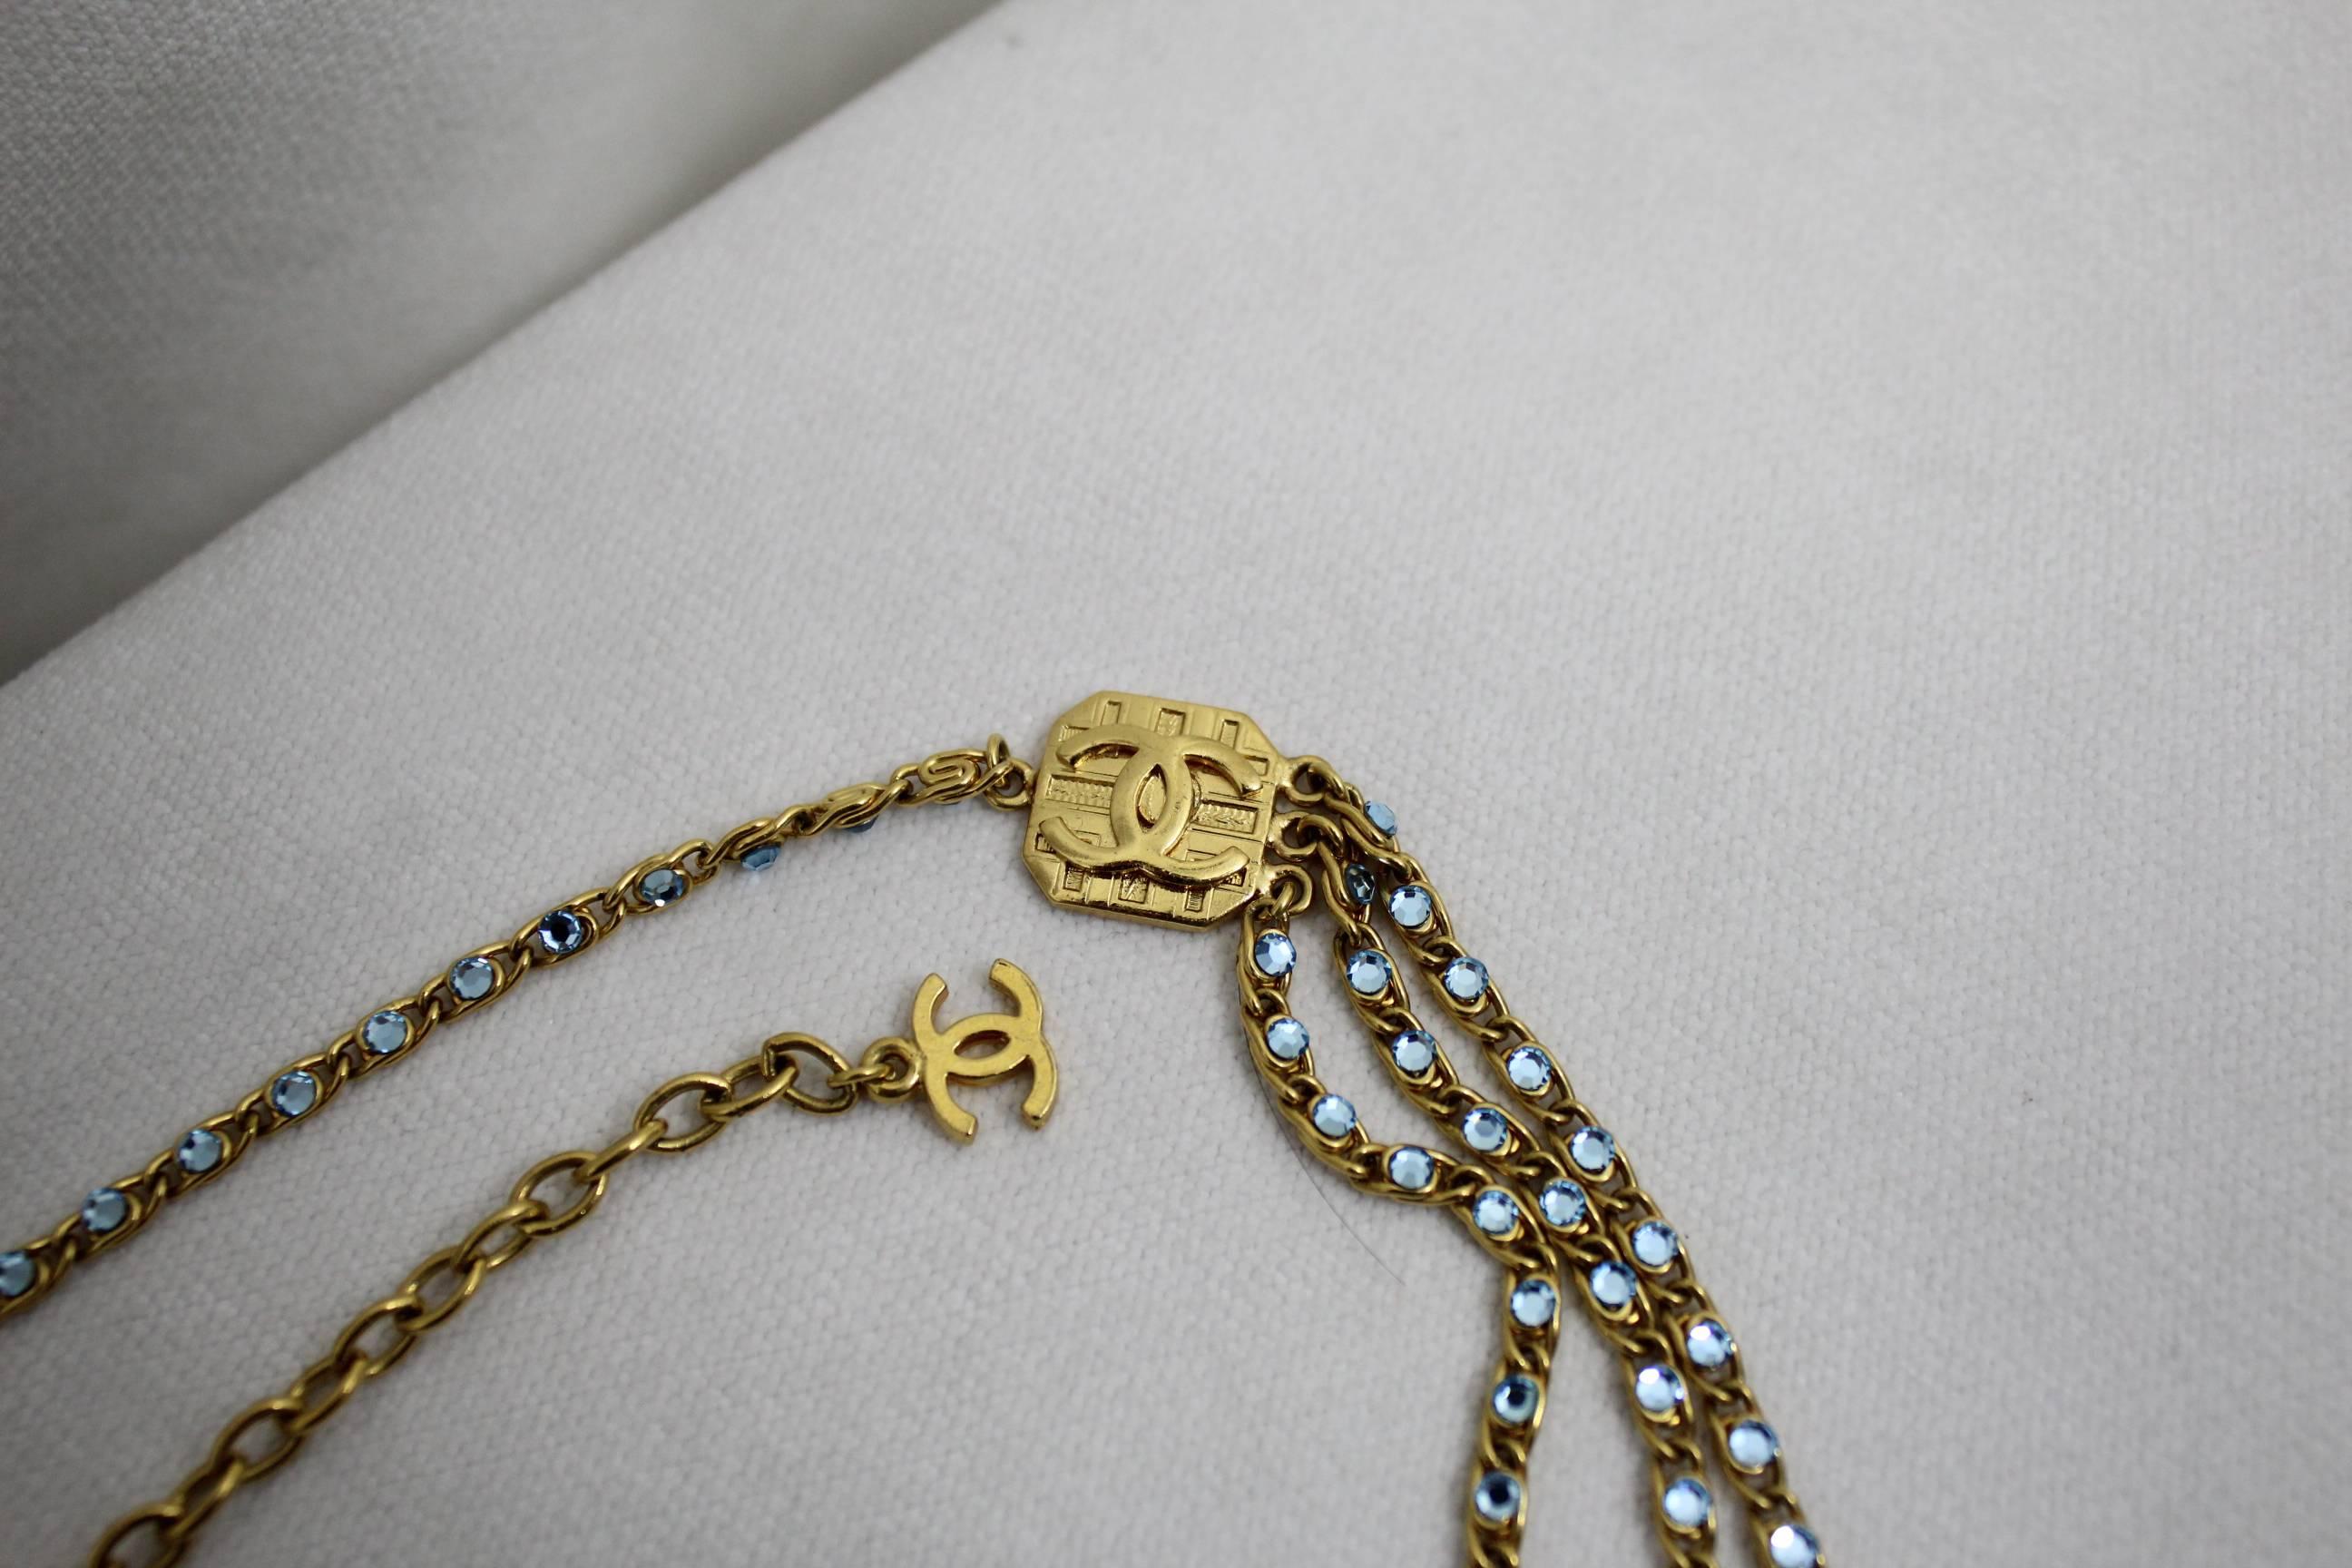 So chic and elegant for everyday use this amazing 3 lines Chanel necklace.
2 CC charms

All decorated with amazing blue stones.

really good condition